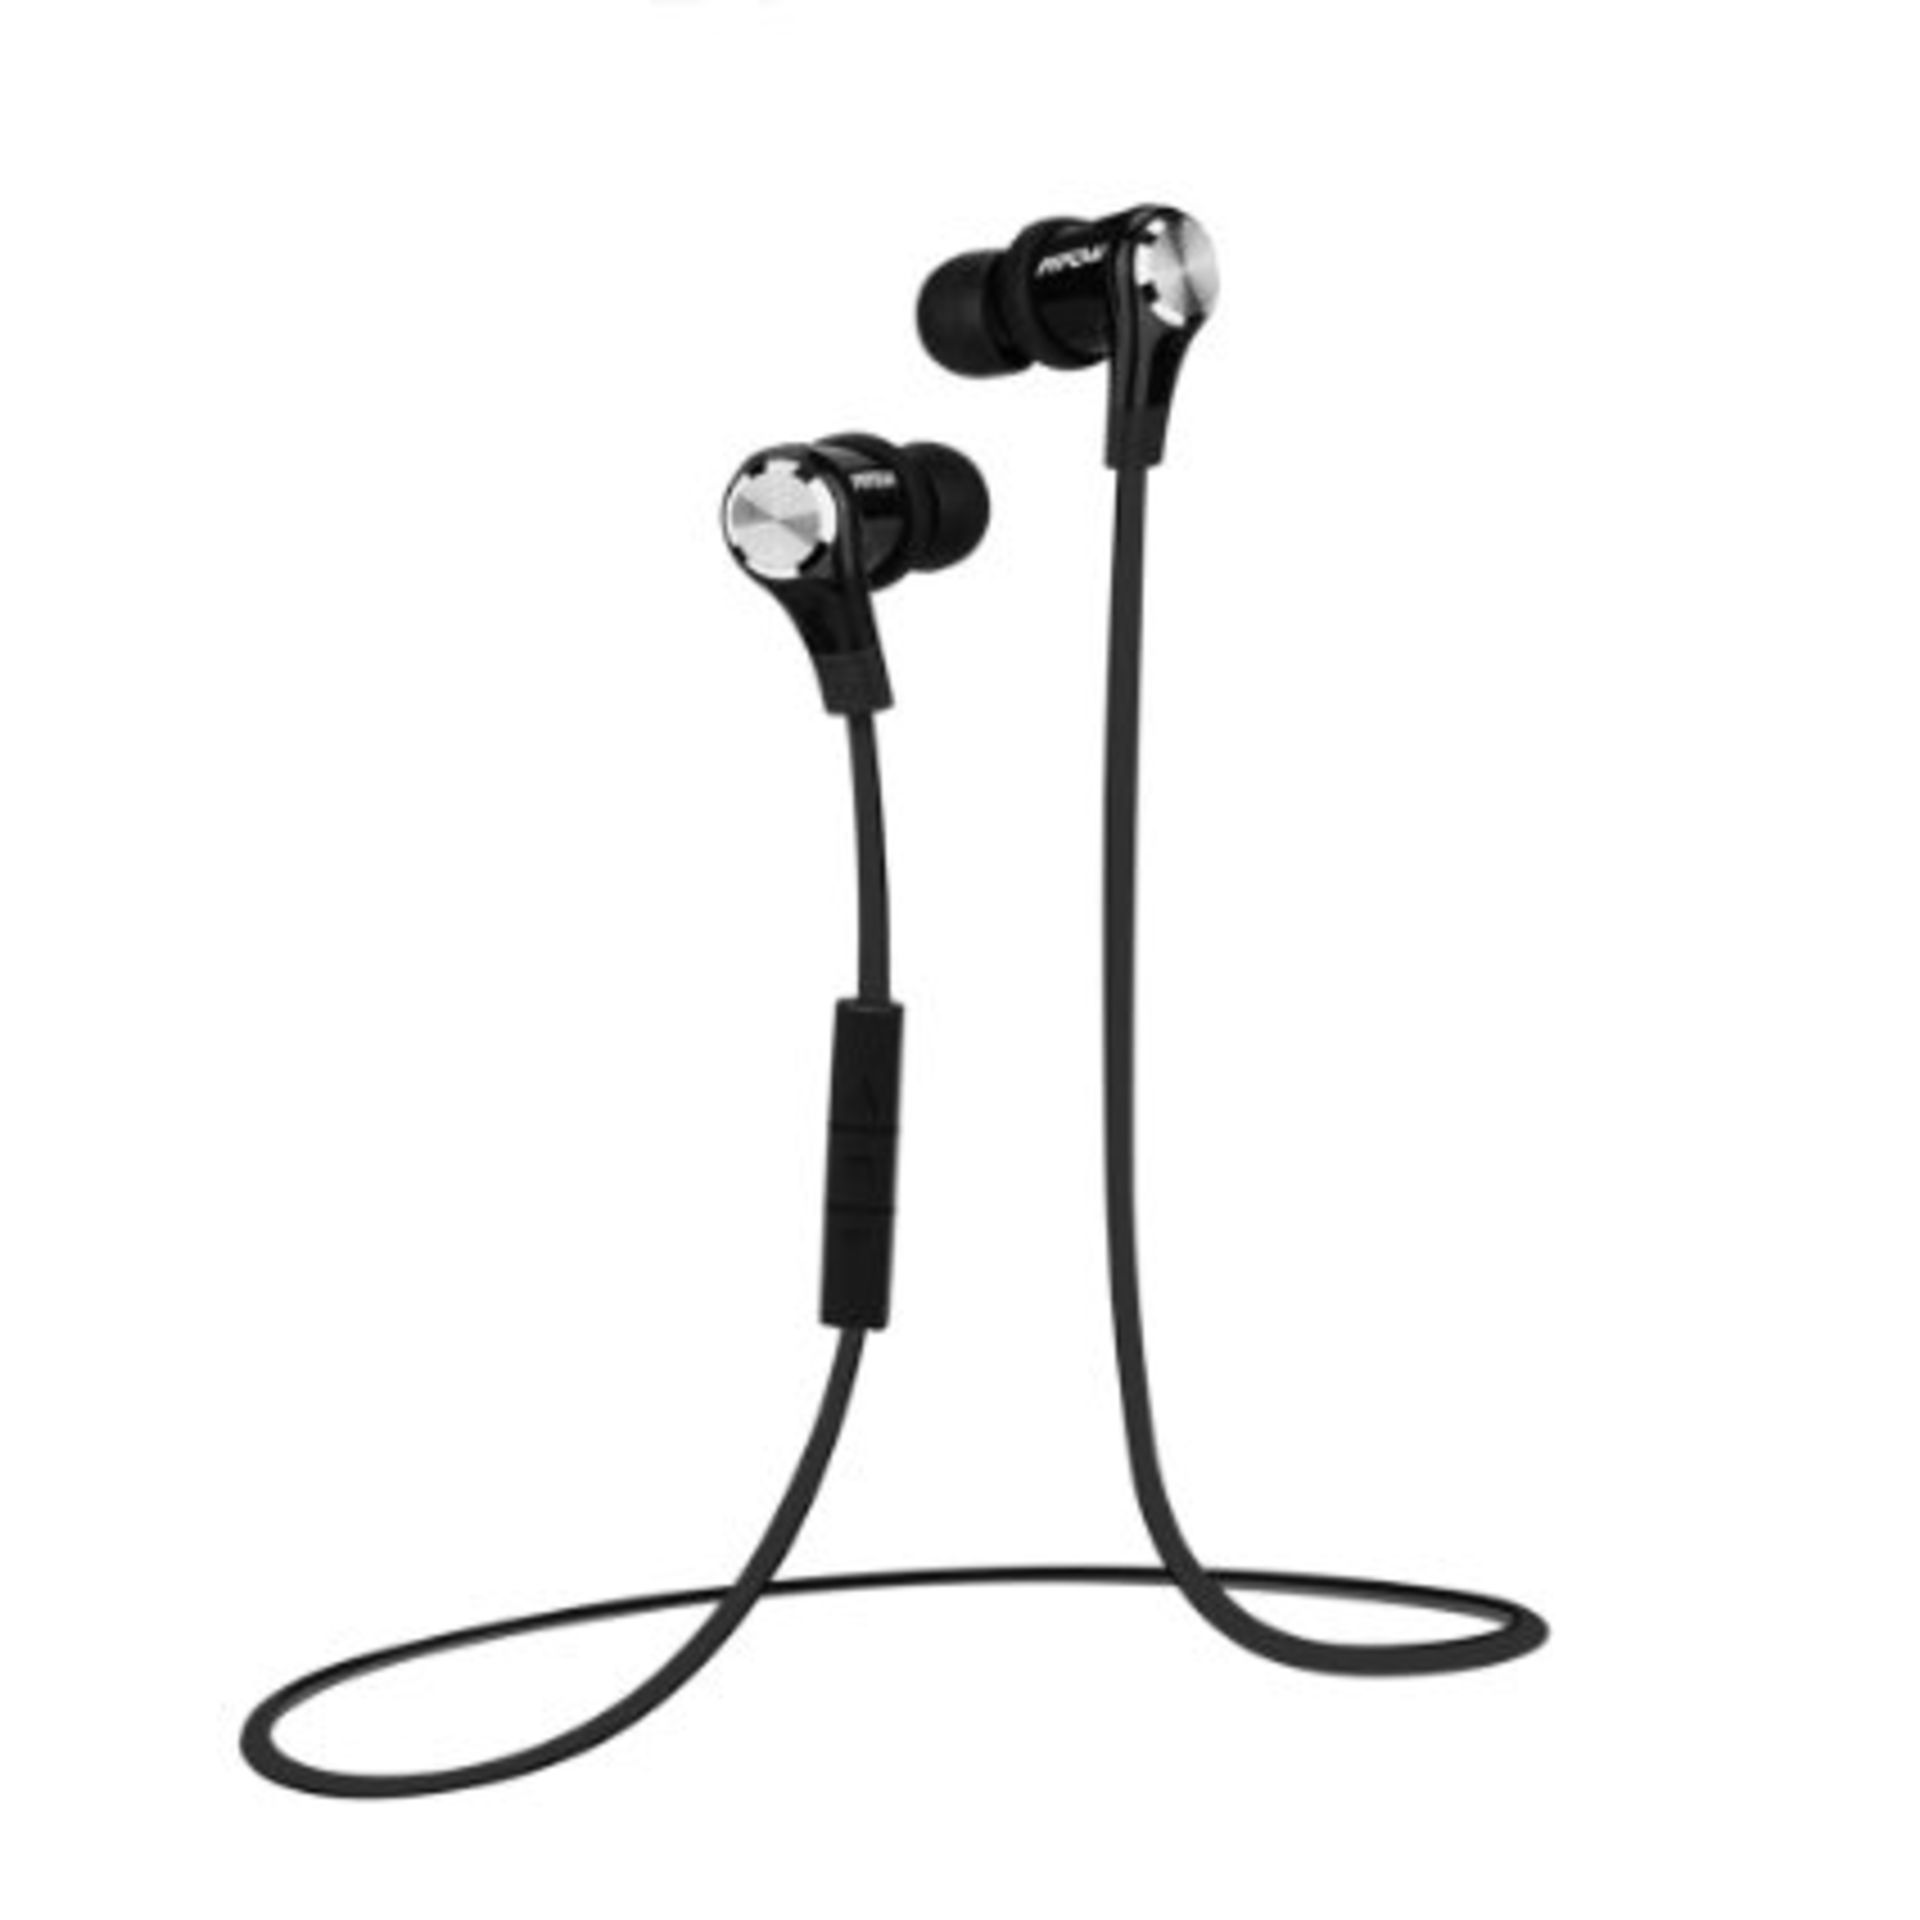 V Brand New Pair of Bluetooth Earphones/Headset (All Boxed) - Colours and Styles/Makes May Vary - - Image 2 of 7